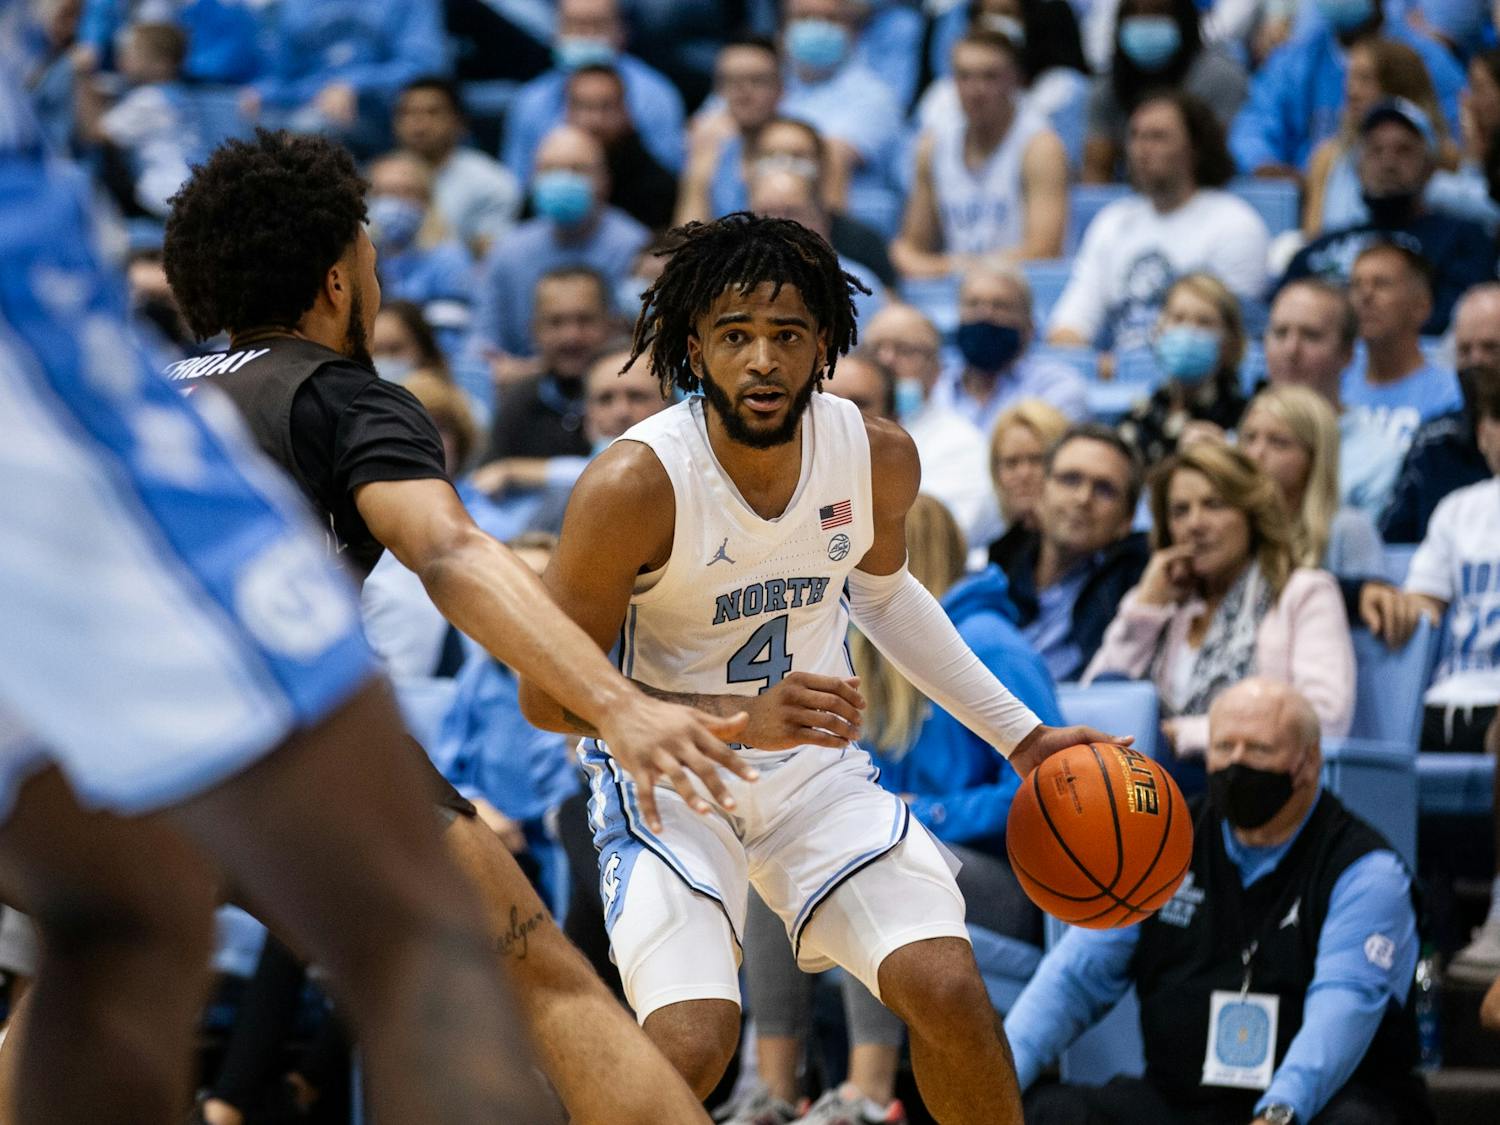 Sophomore guard RJ Davis (4) searches for a pass during a game against Brown at the Smith Center on Nov. 12. The Tar Heels defeated Brown 94-87, earning their second win of the season.